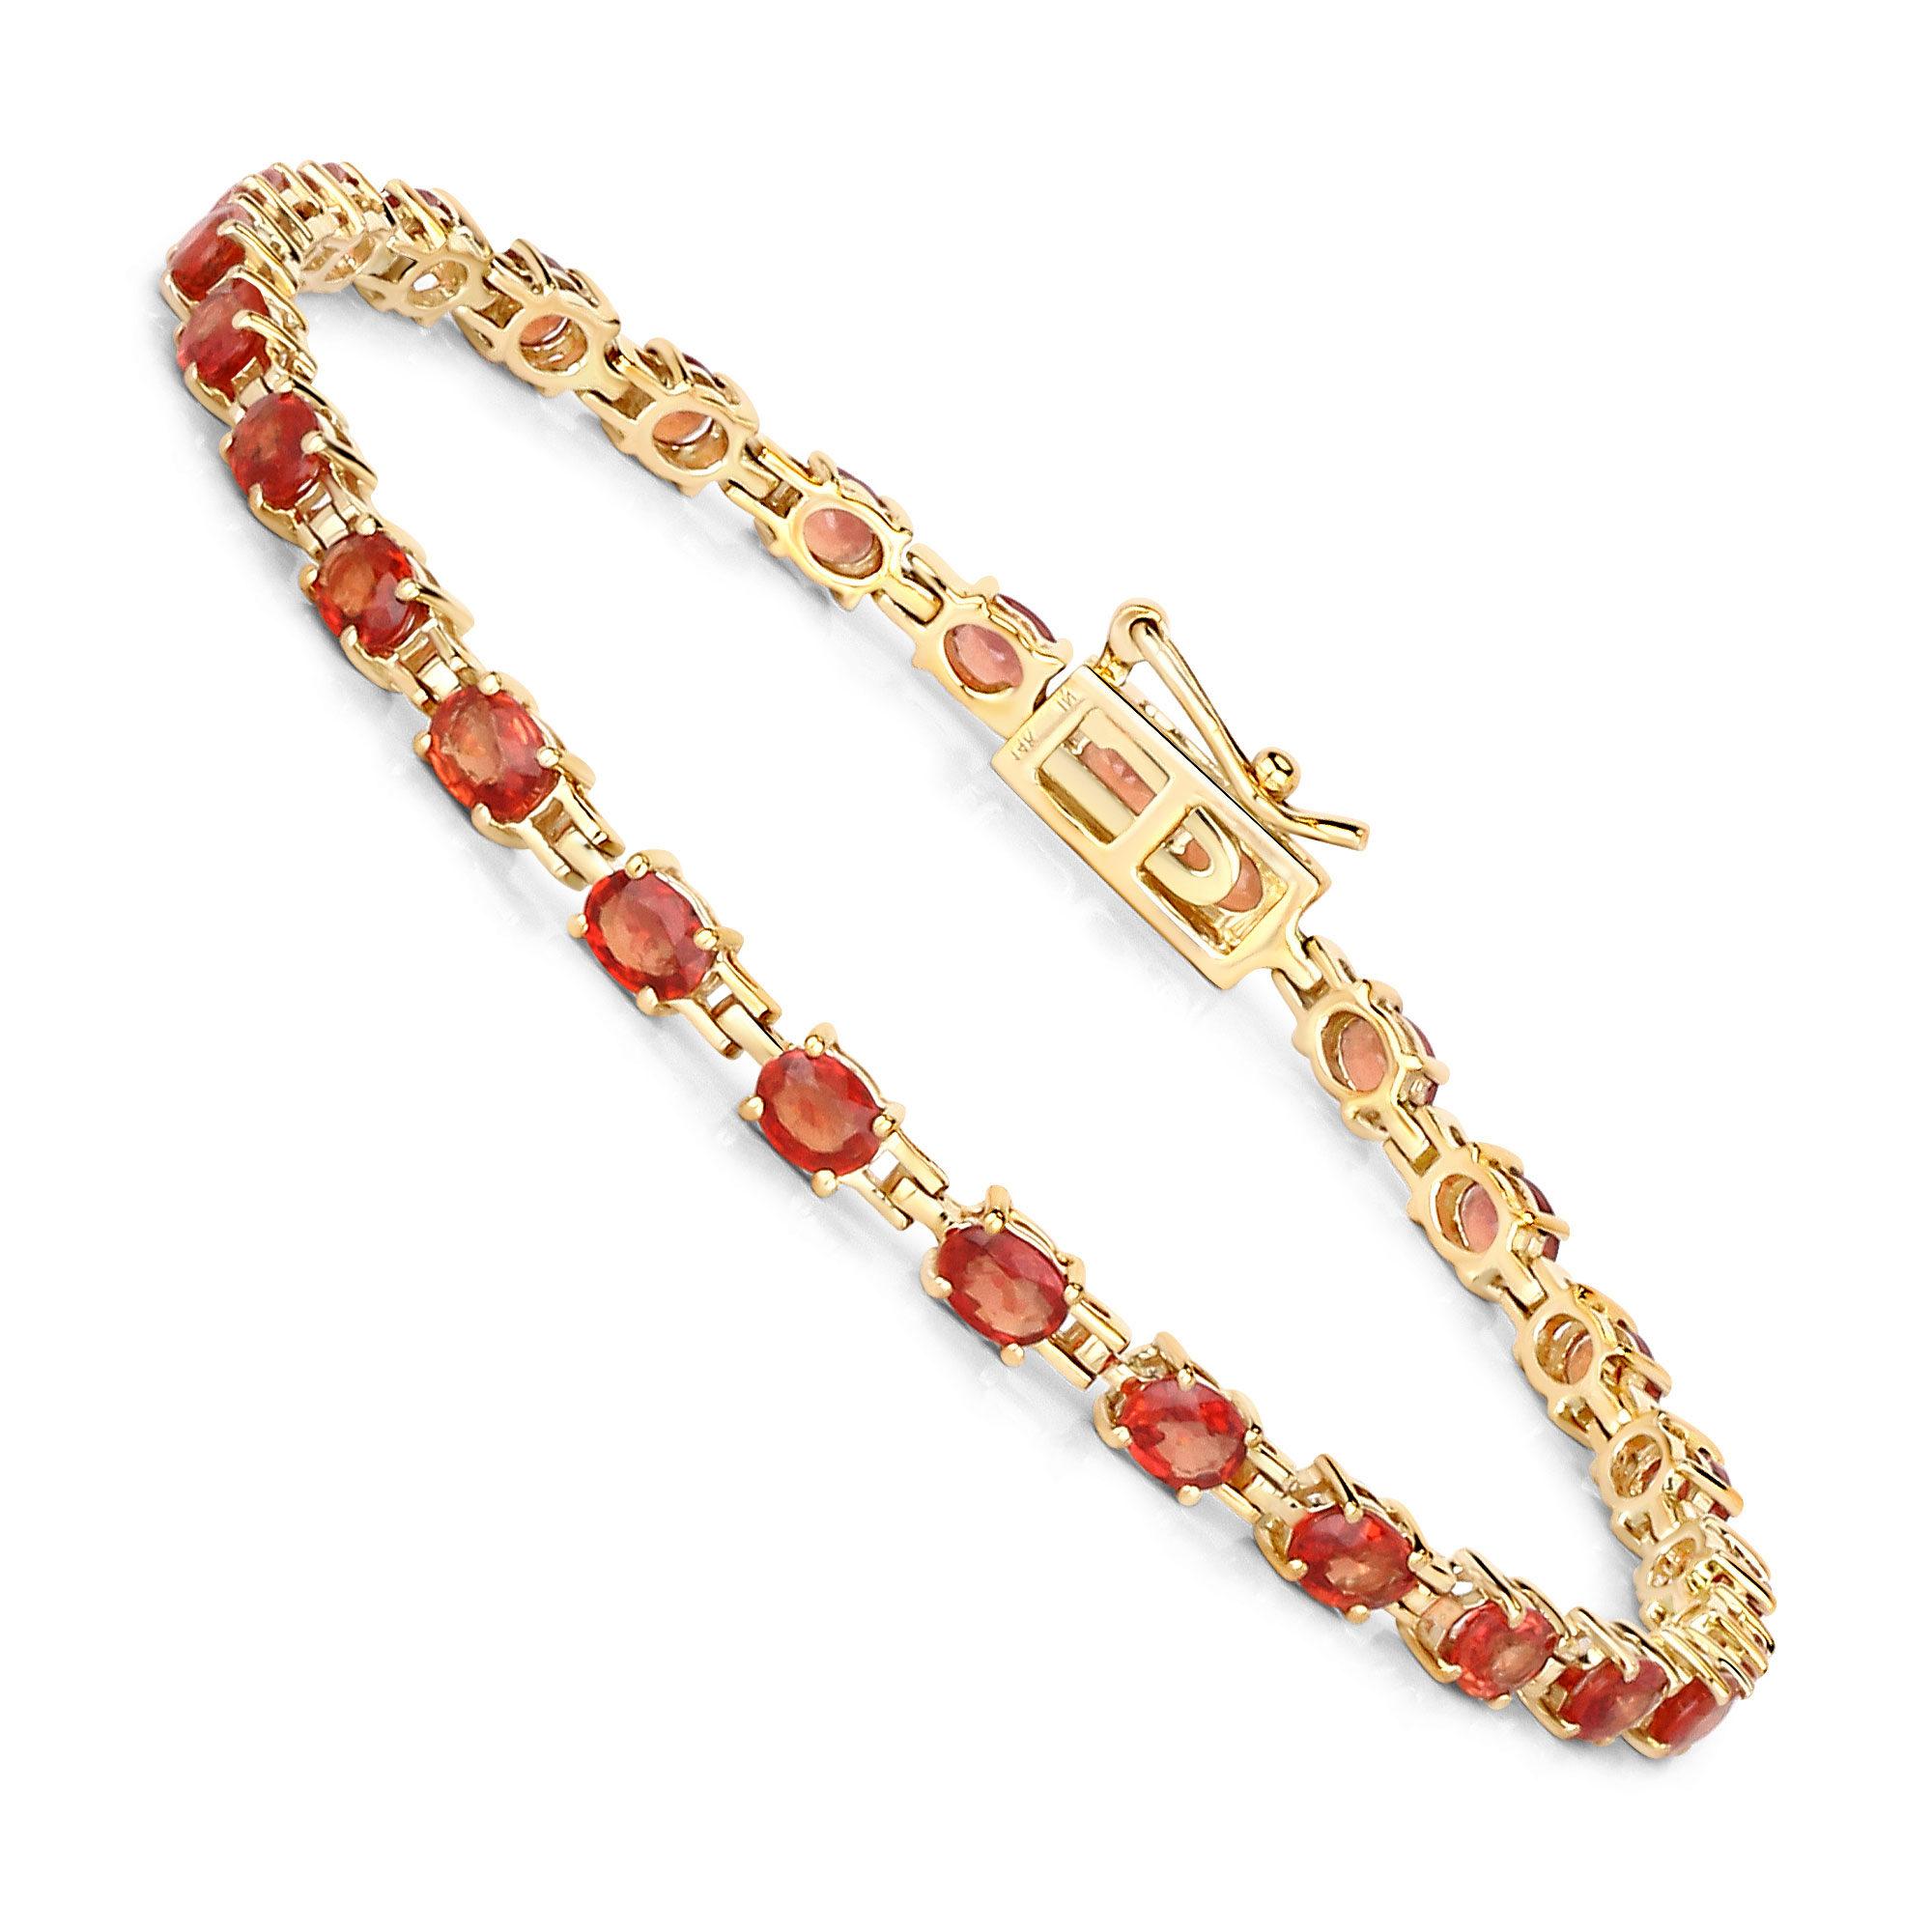 Stunning Natural Red Orange Sapphire Tennis Bracelet 7 Carats 14k Yellow Gold For Sale 2